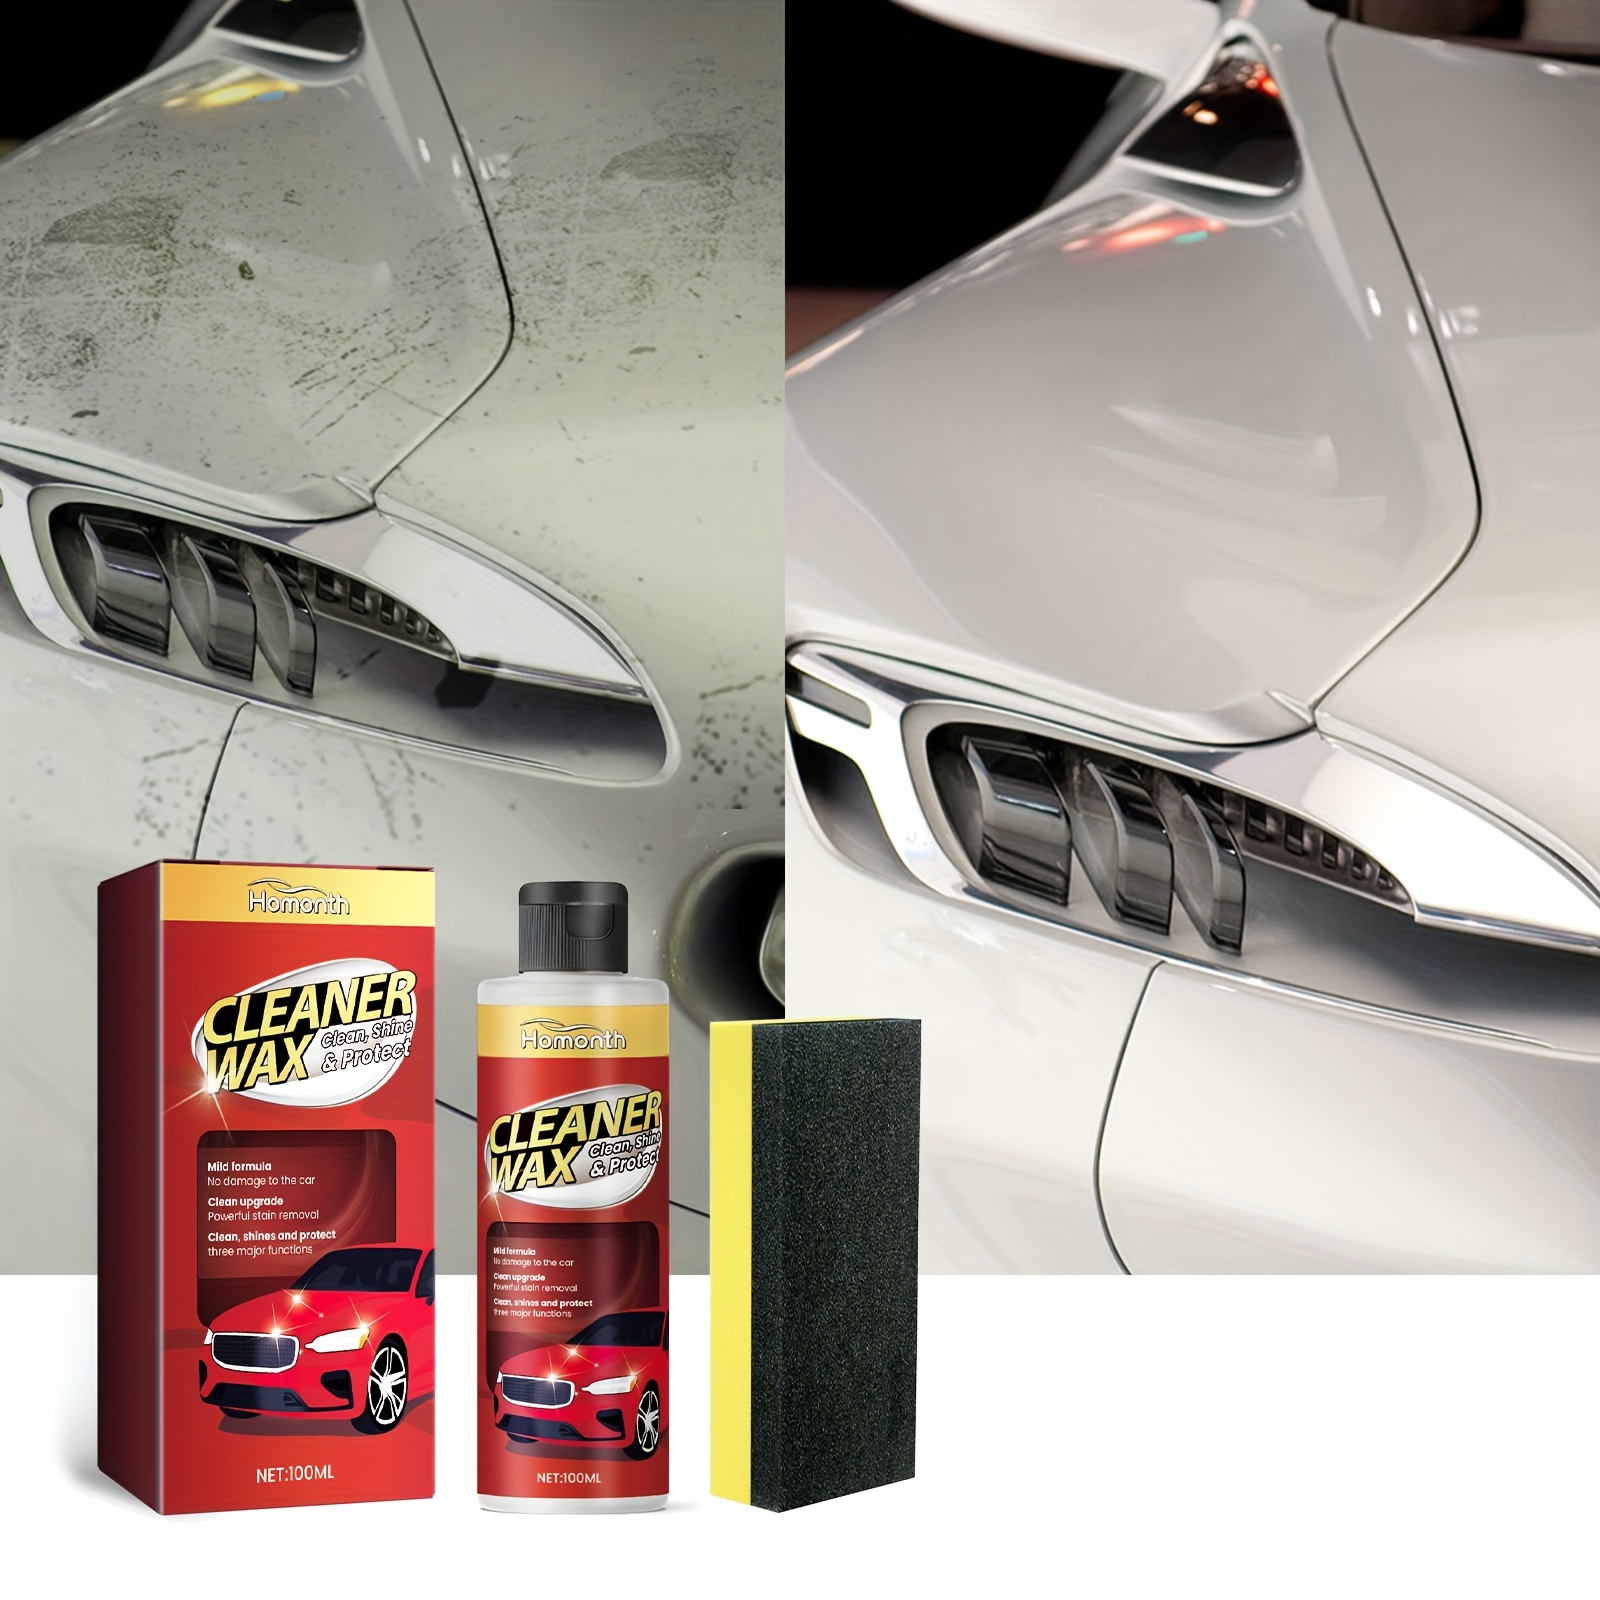 Car Scratch Remover To Make Your Car Scratch-Free Instantly - Times of  India (February, 2024)